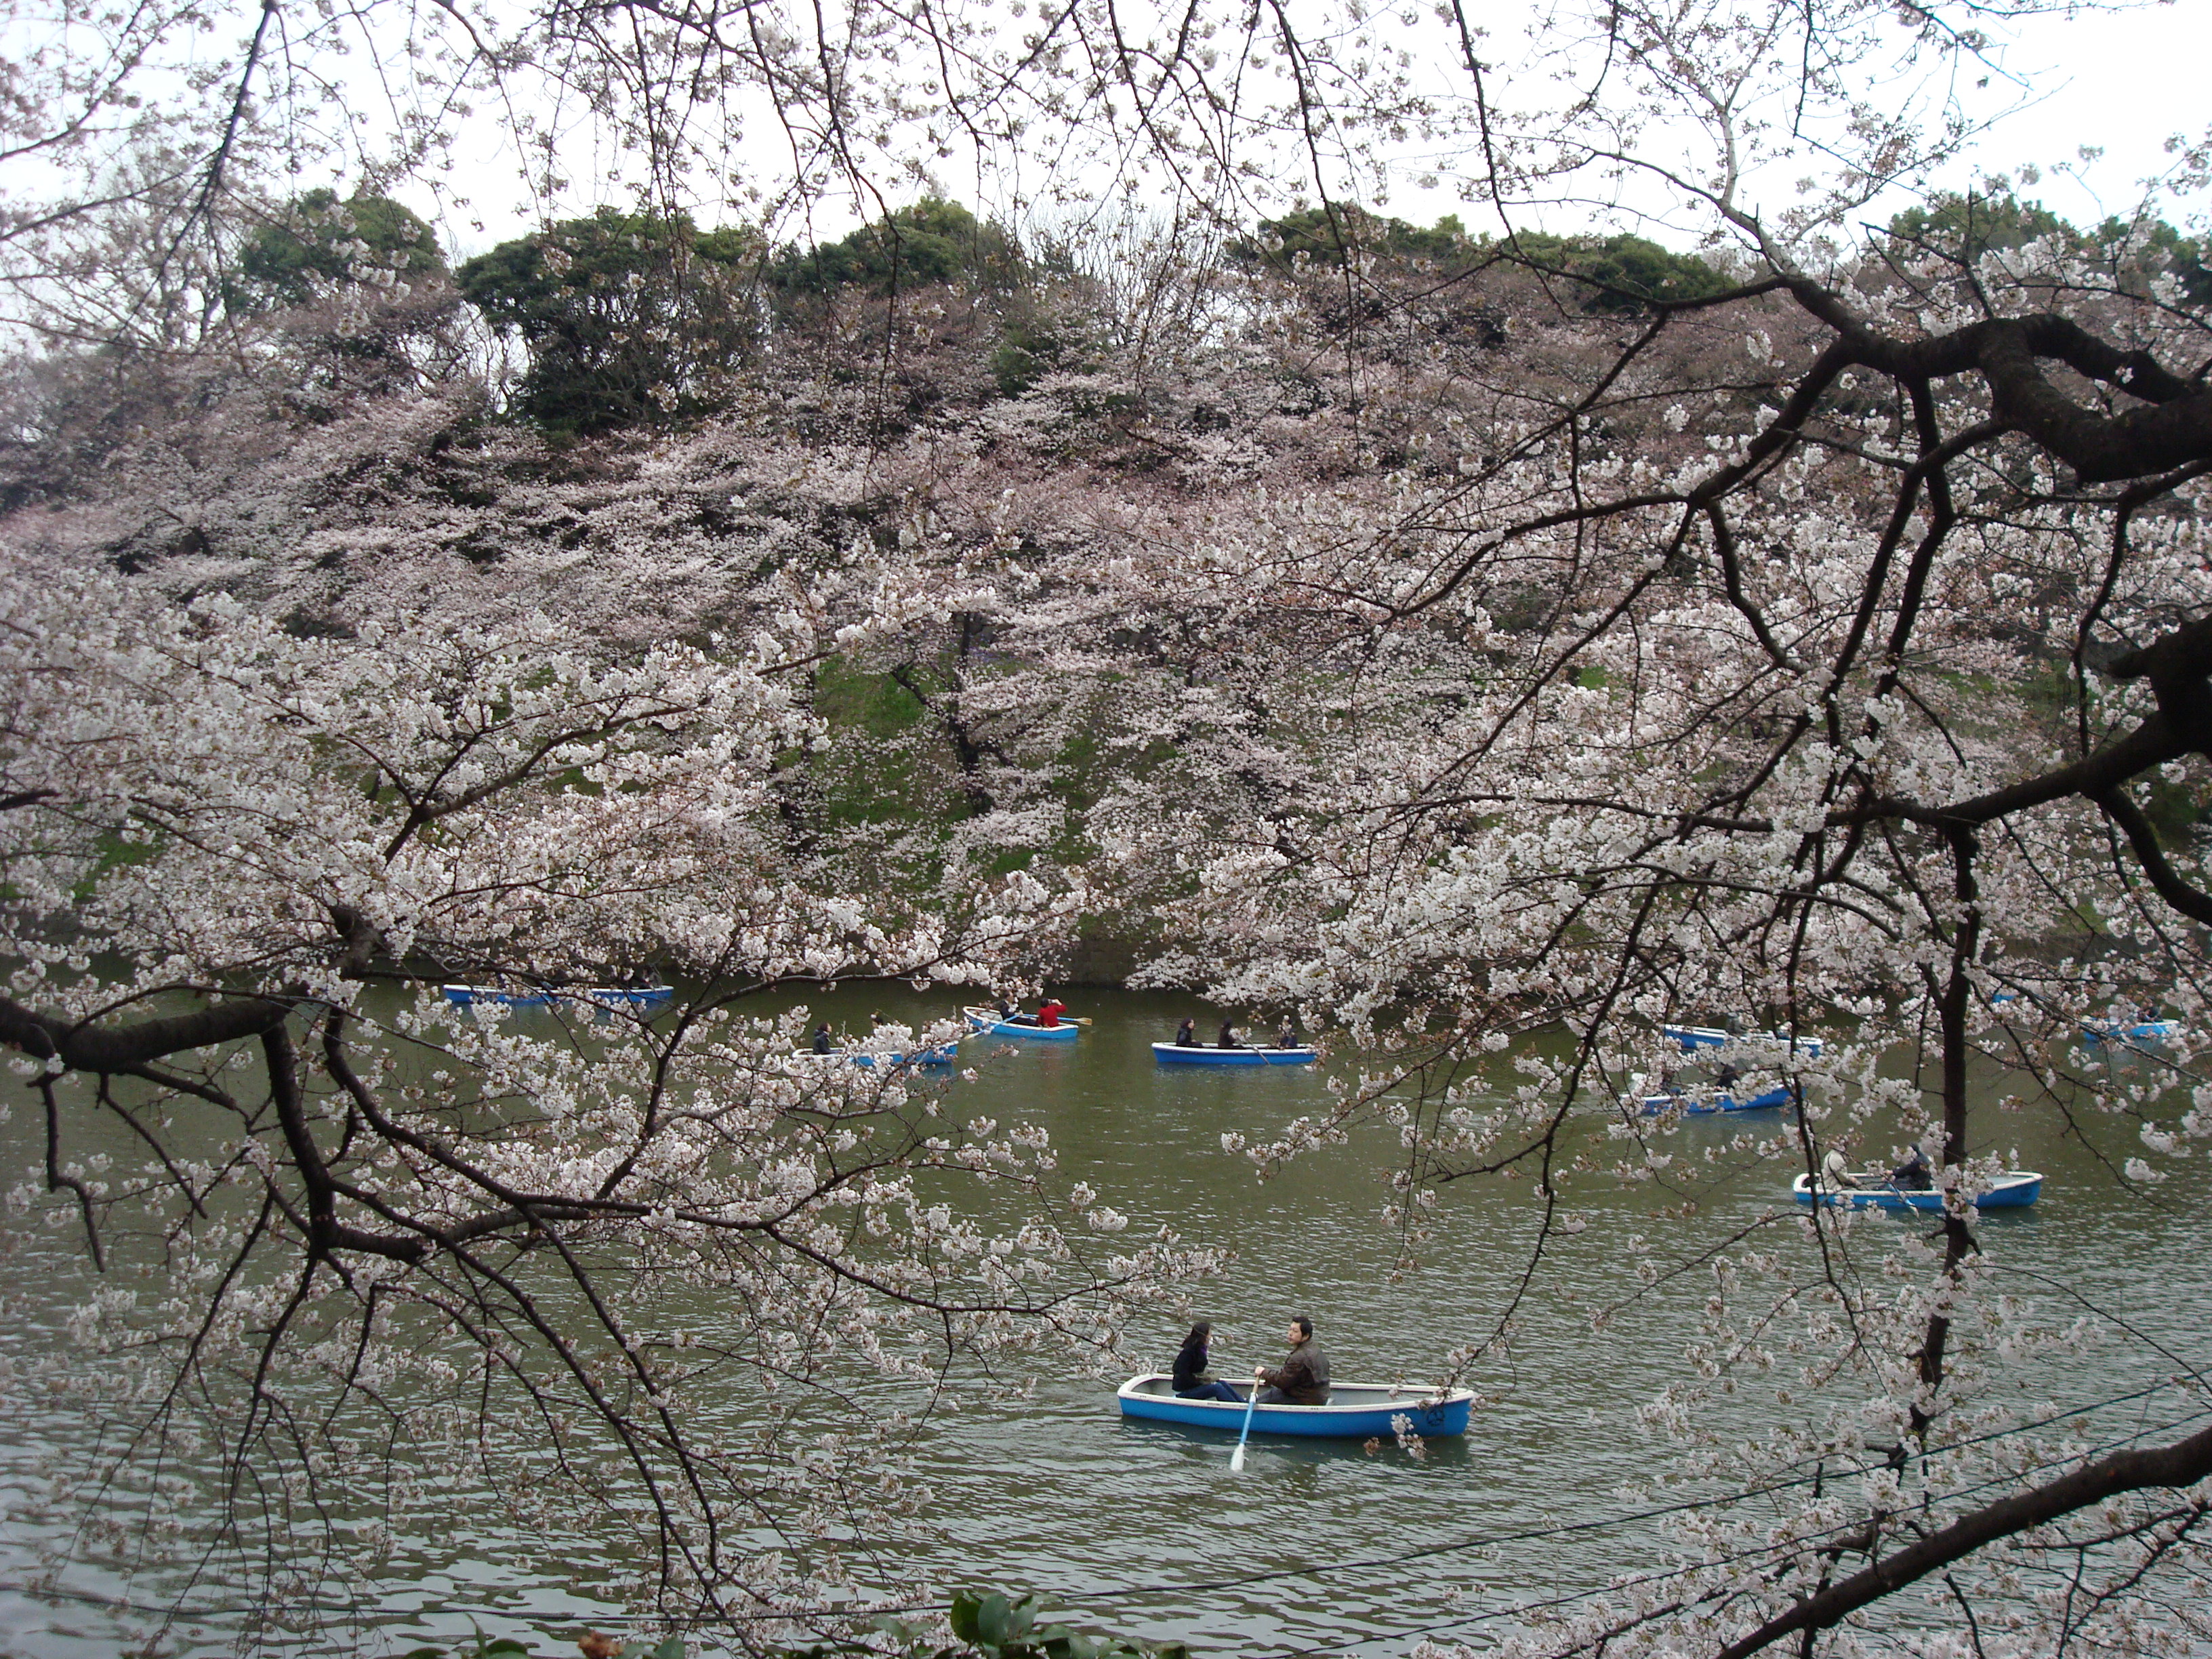 Boating during cherry blossom season in japan